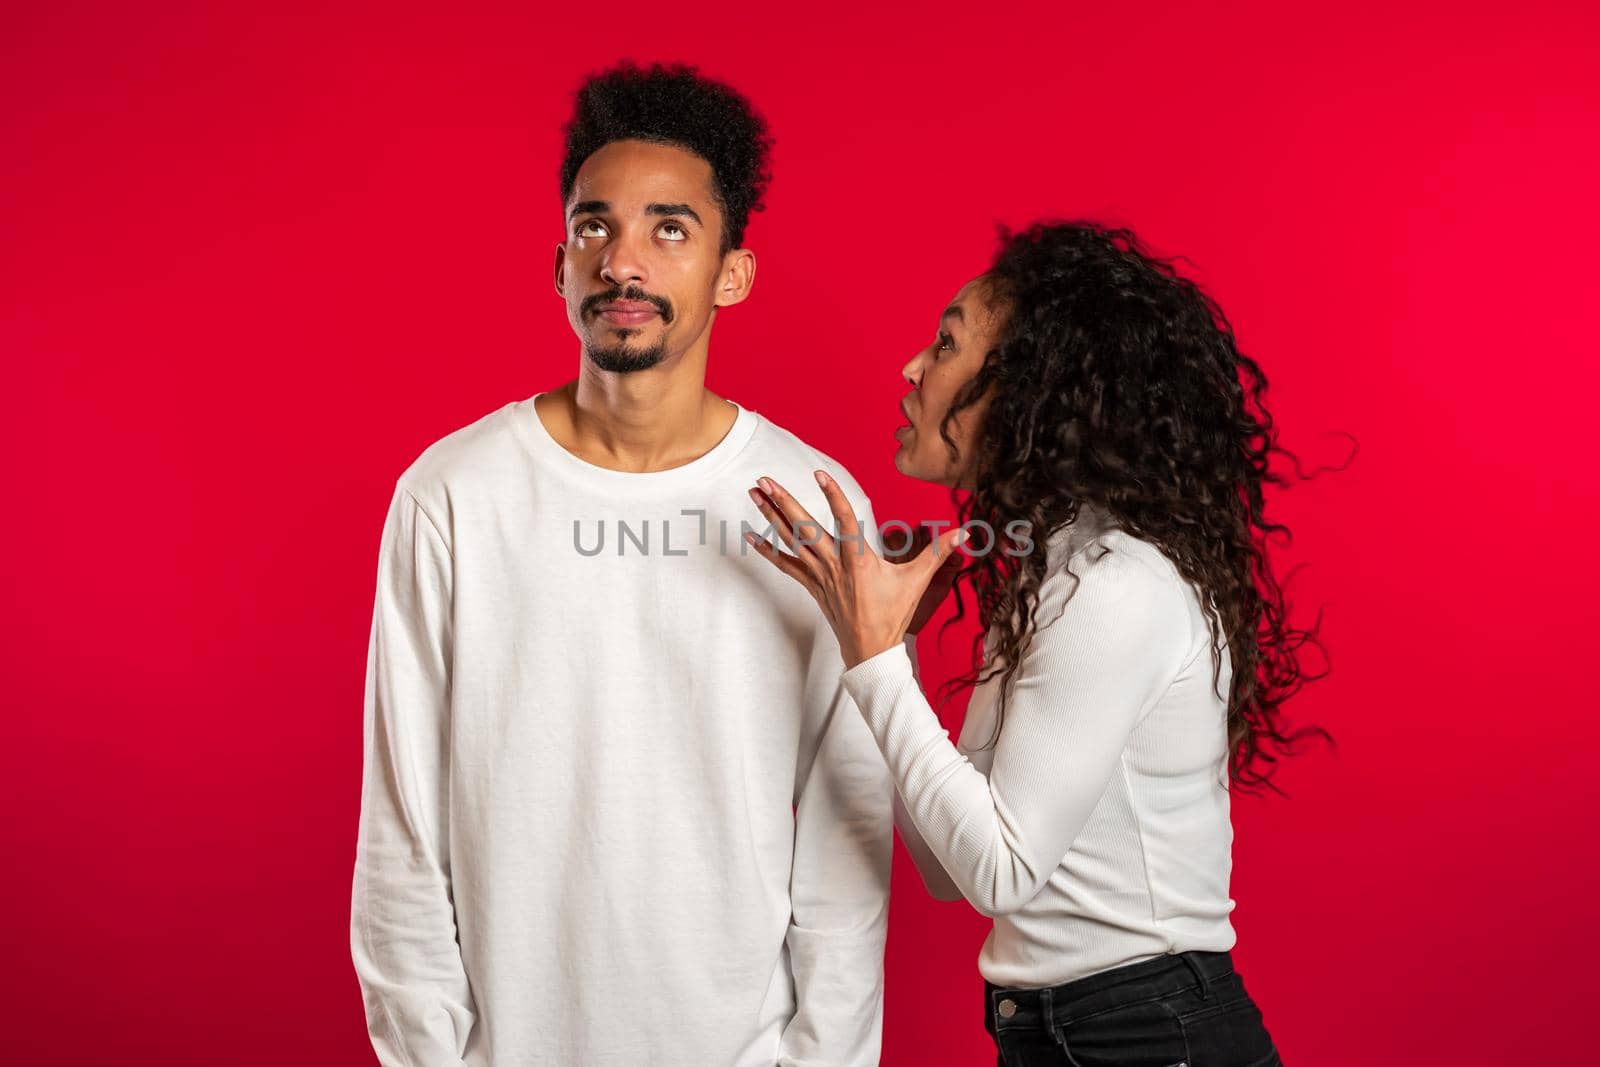 Young african woman emotionally screaming at her husband or boyfriend on red background in studio. Bored man rolling his eyes. Concept of conflict, problems in relationships